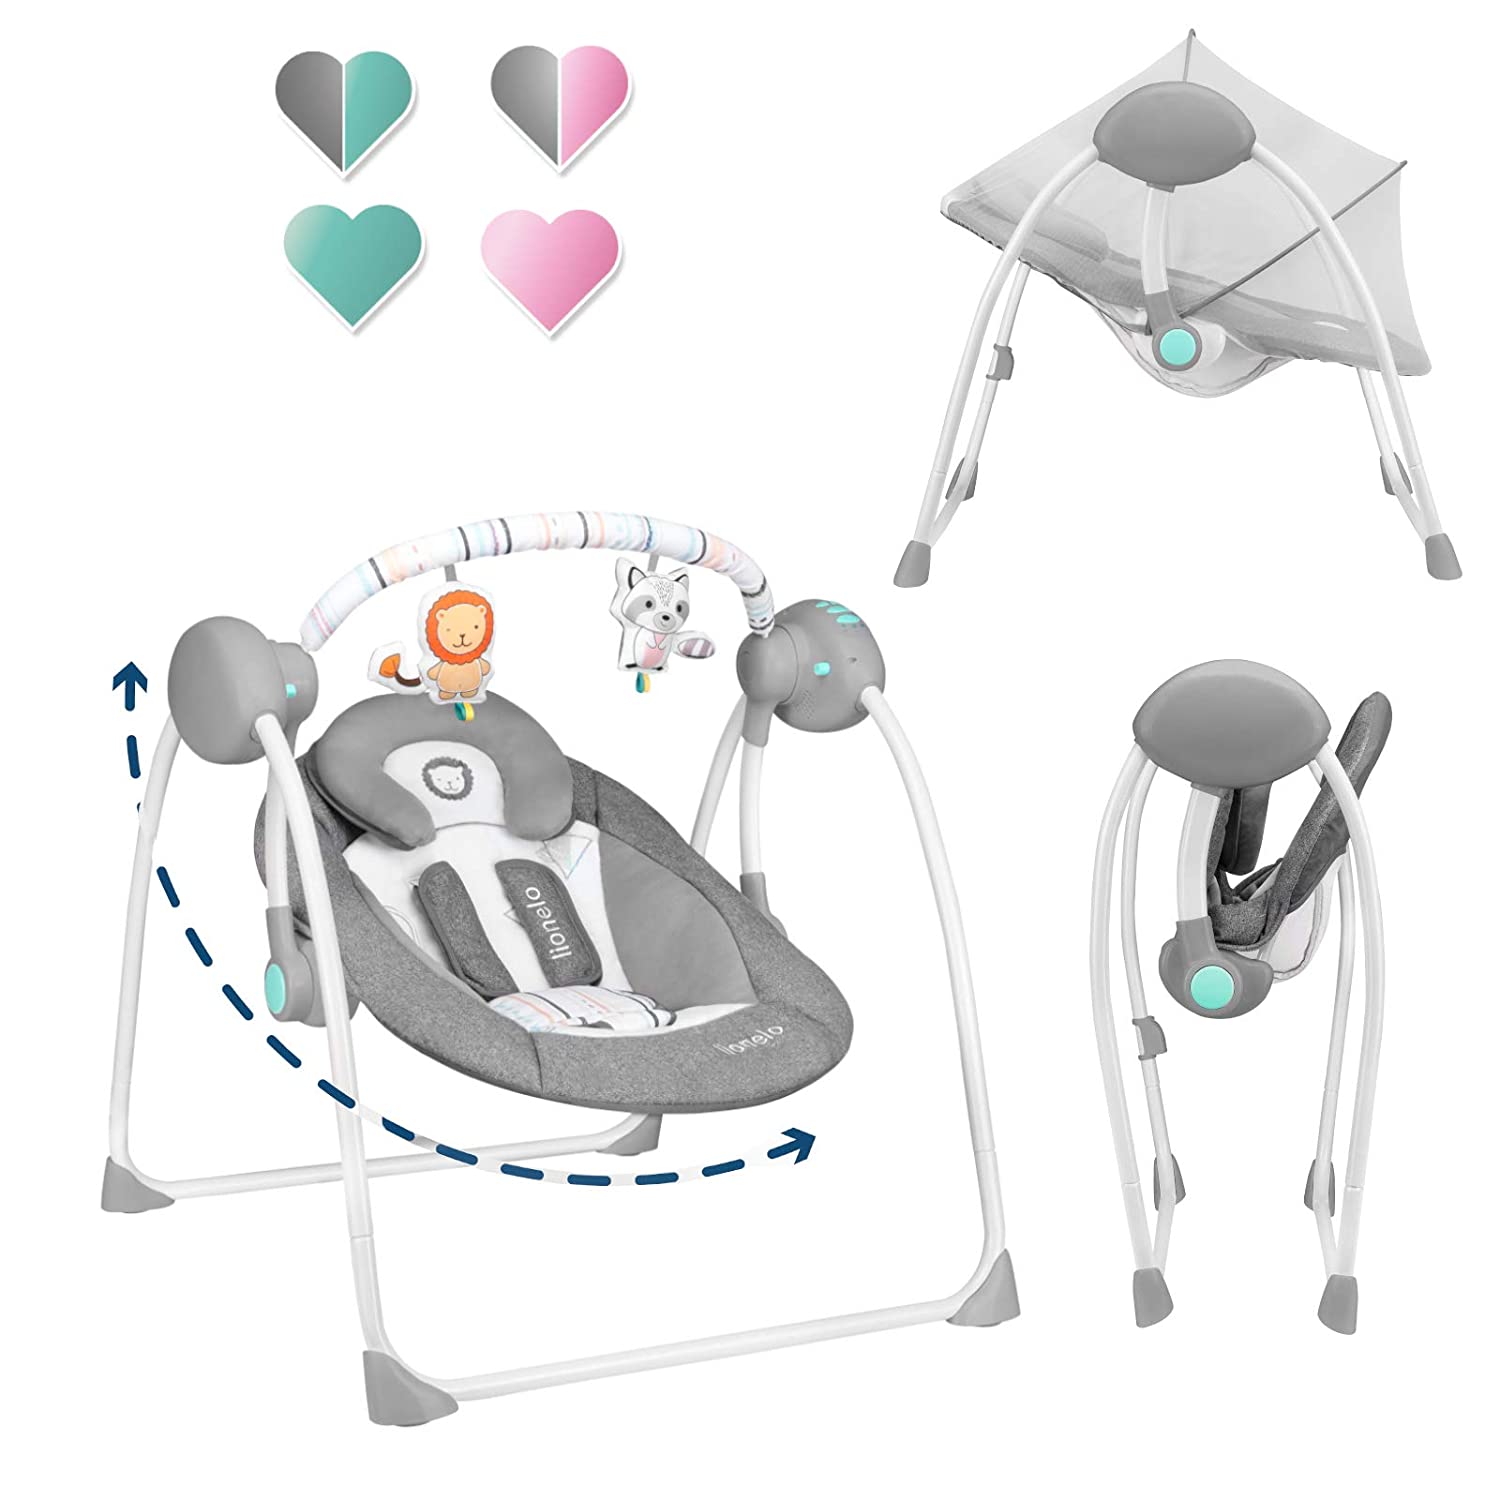 LIONELO Ruben Baby Rocker Electric Baby Swing with Reclining Function, Baby Swing 0 to 9 kg, Mosquito Net, 5 Swing Speeds, Cuddly Toy Hanger